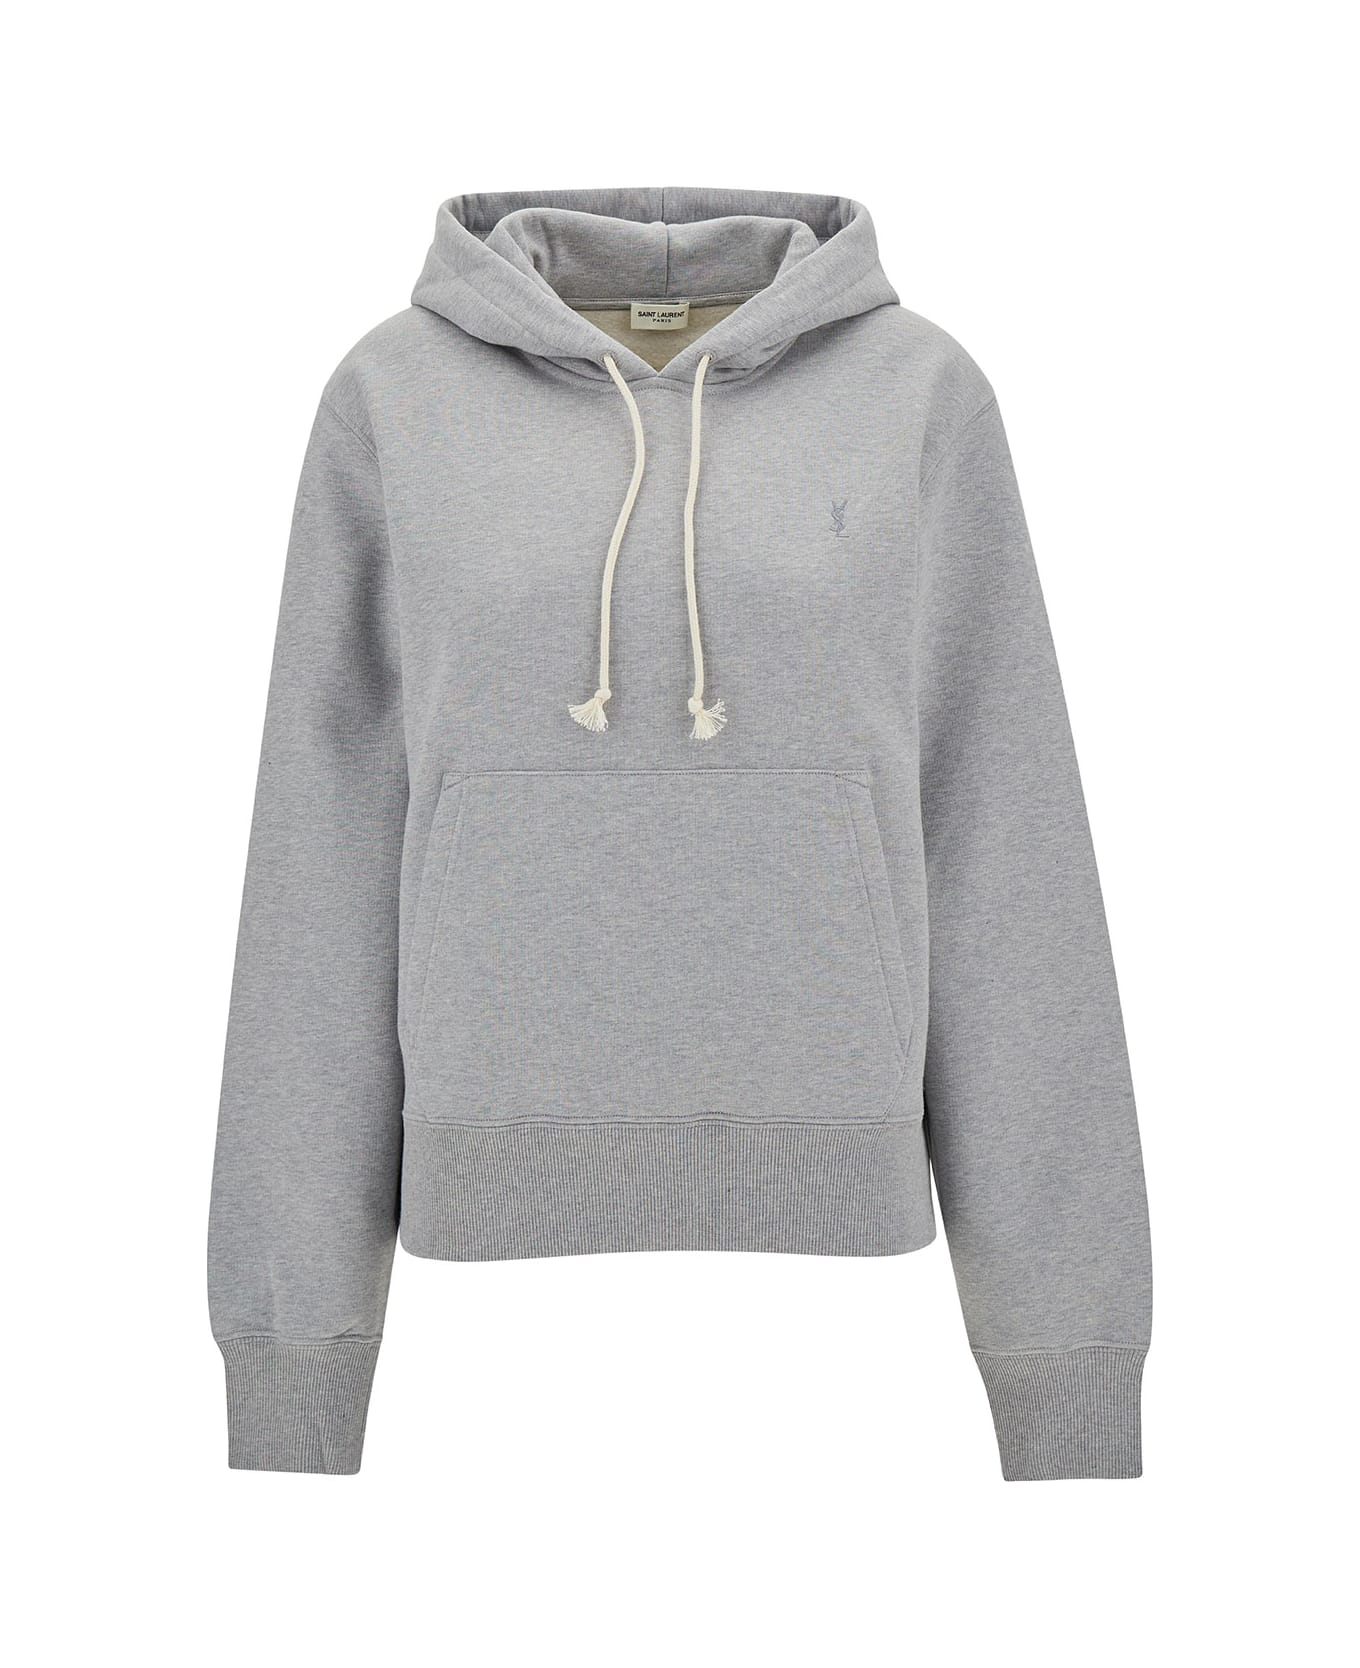 Saint Laurent Grey Hoodie With Cassandre Embroidery In Cotton Woman - Grey ニットウェア